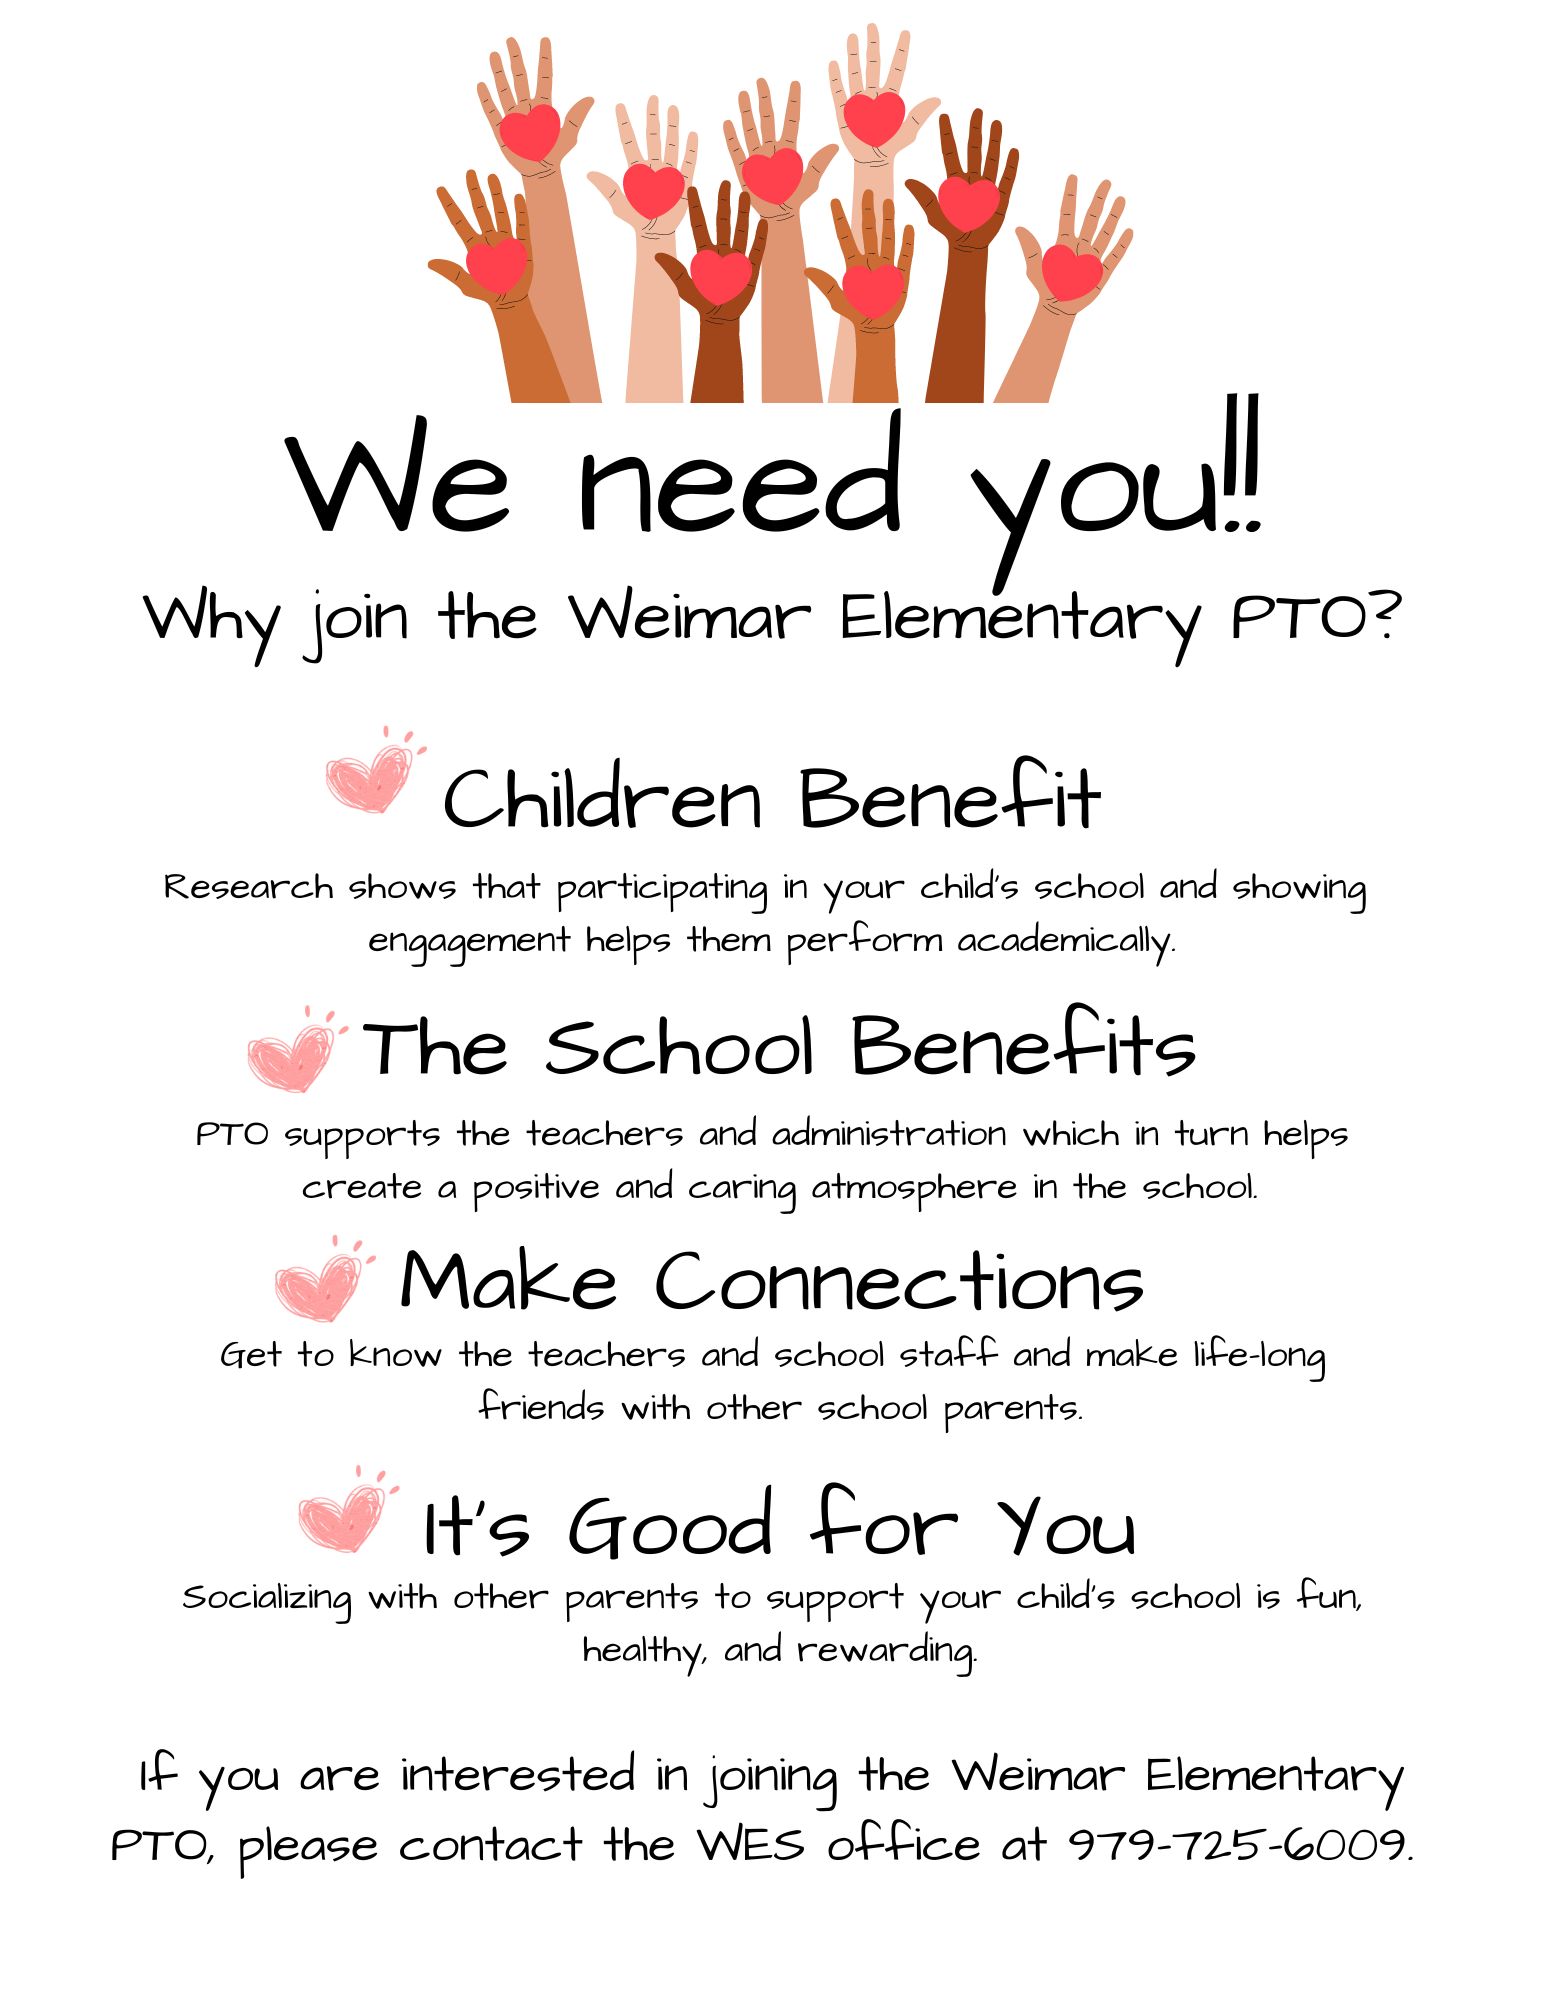 We need you! Join the WES PTO